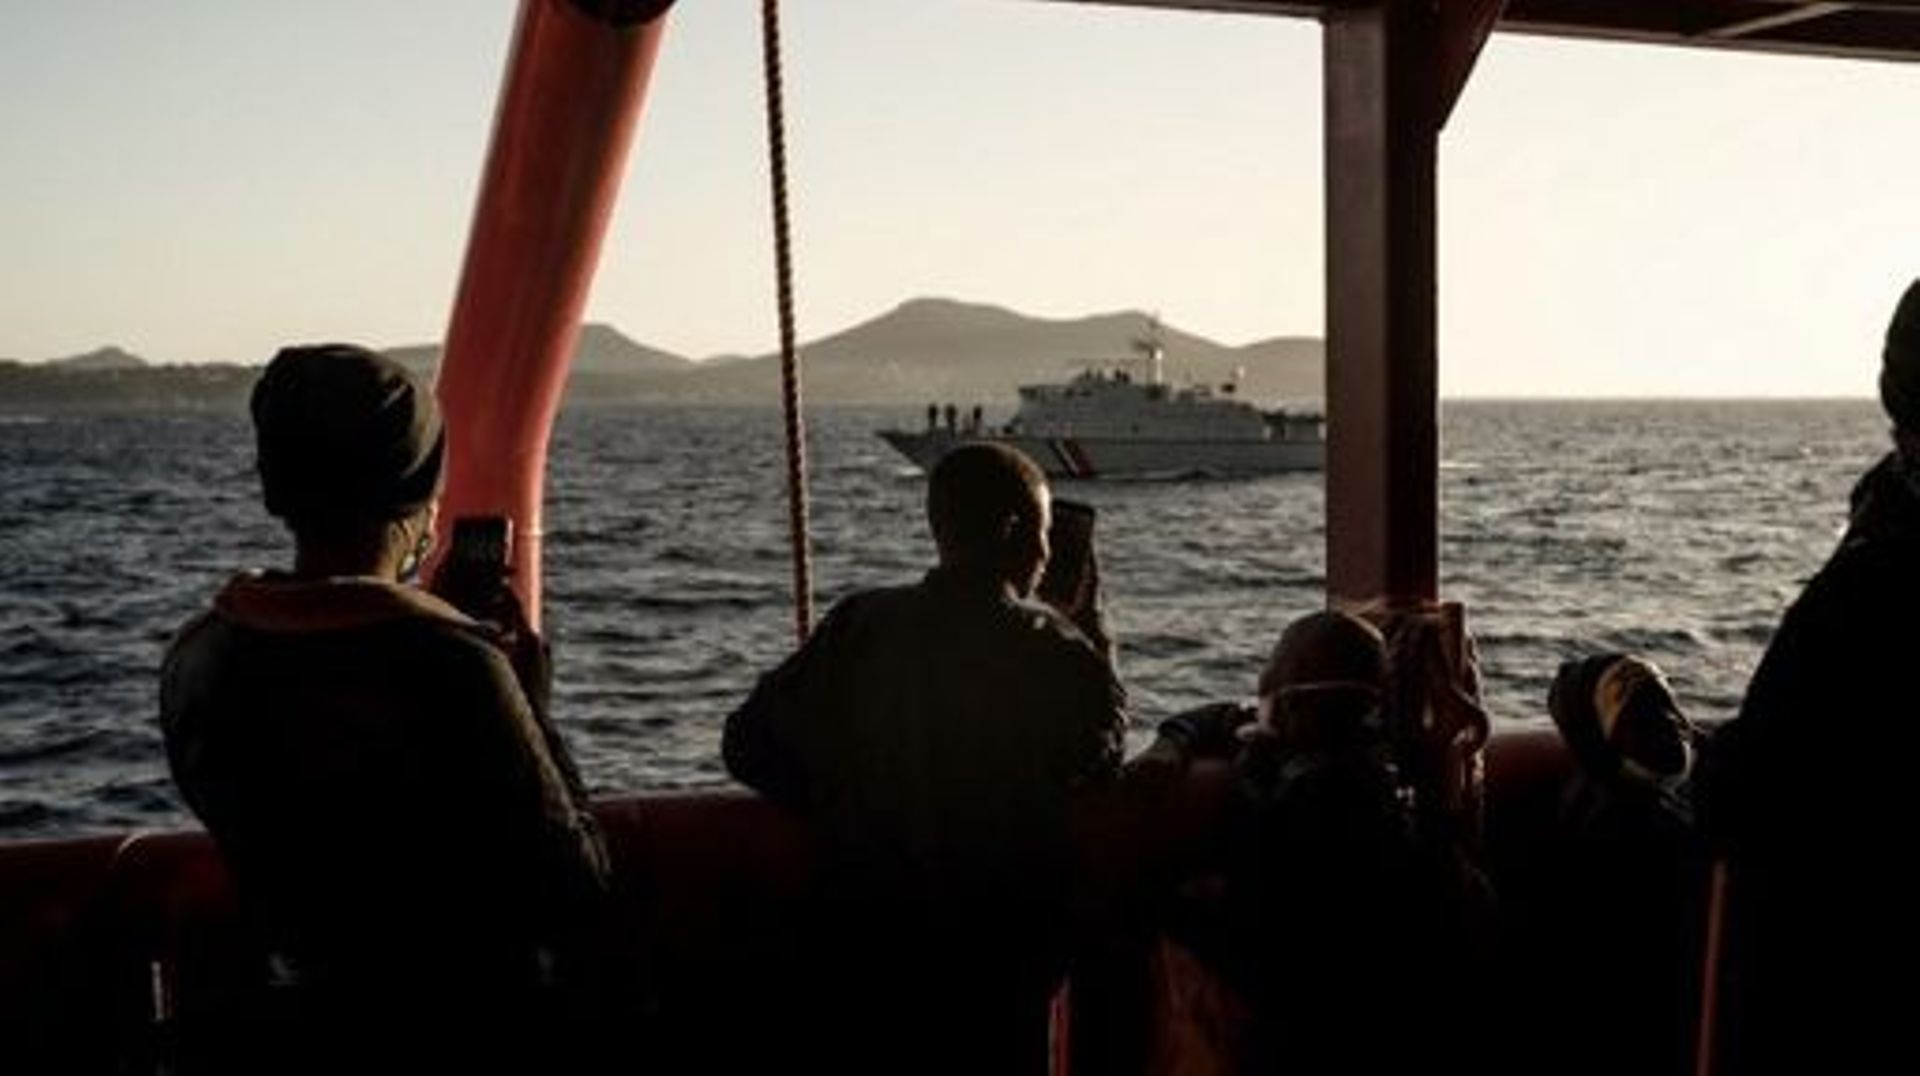 Migrants stand on board the Ocean Viking prior disembarking in Toulon on November 11, 2022, after being rescued by European maritime-humanitarian organization "SOS Mediterranee".  Migrant rescue group SOS Mediterranee said on November 3, 2022 it had calle